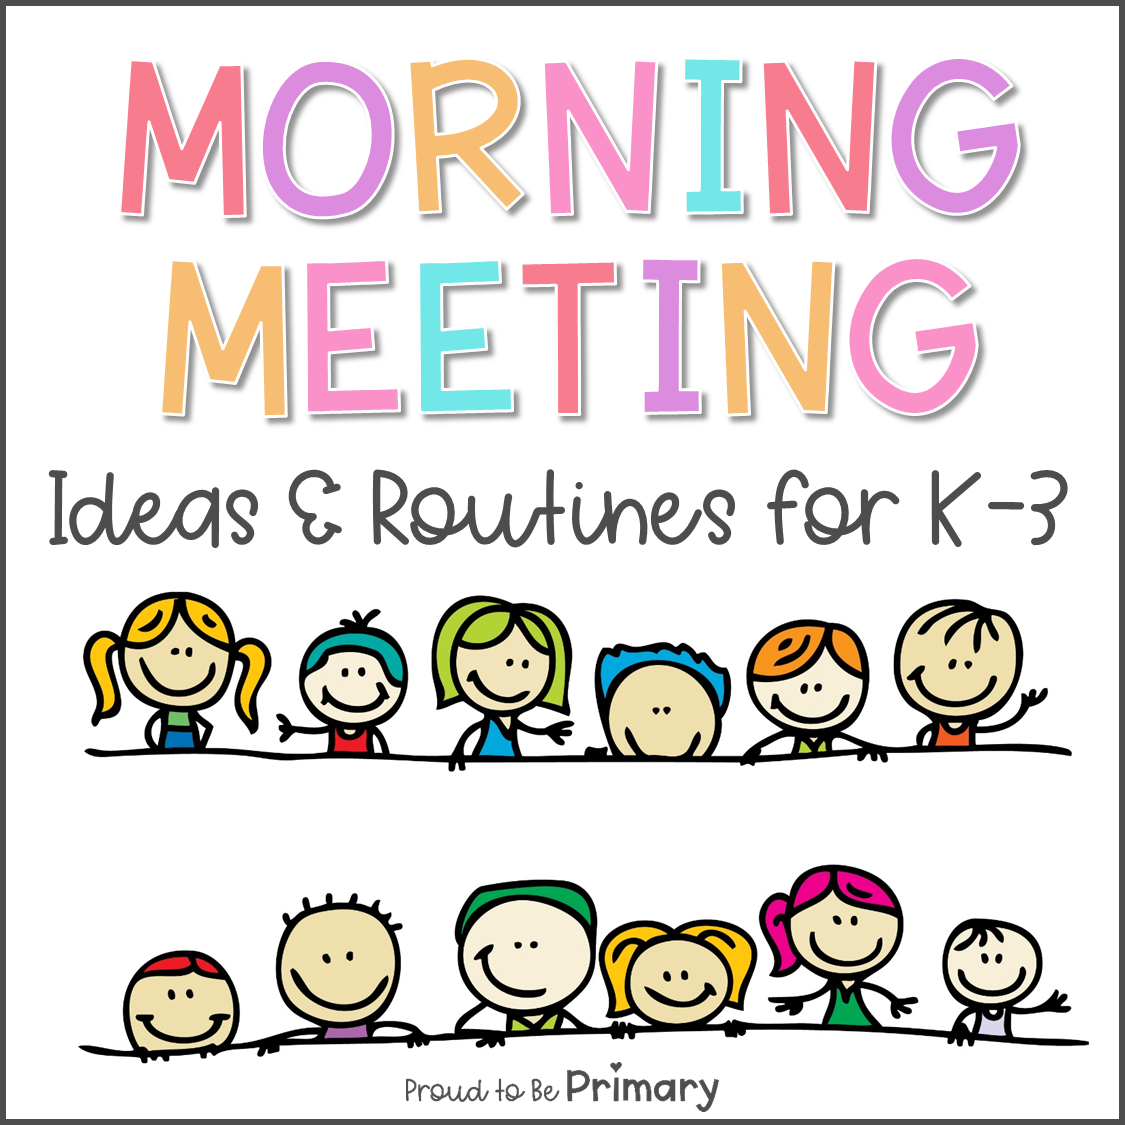 Morning Meeting Ideas and Routines for K-3 to Start the Day Off Right